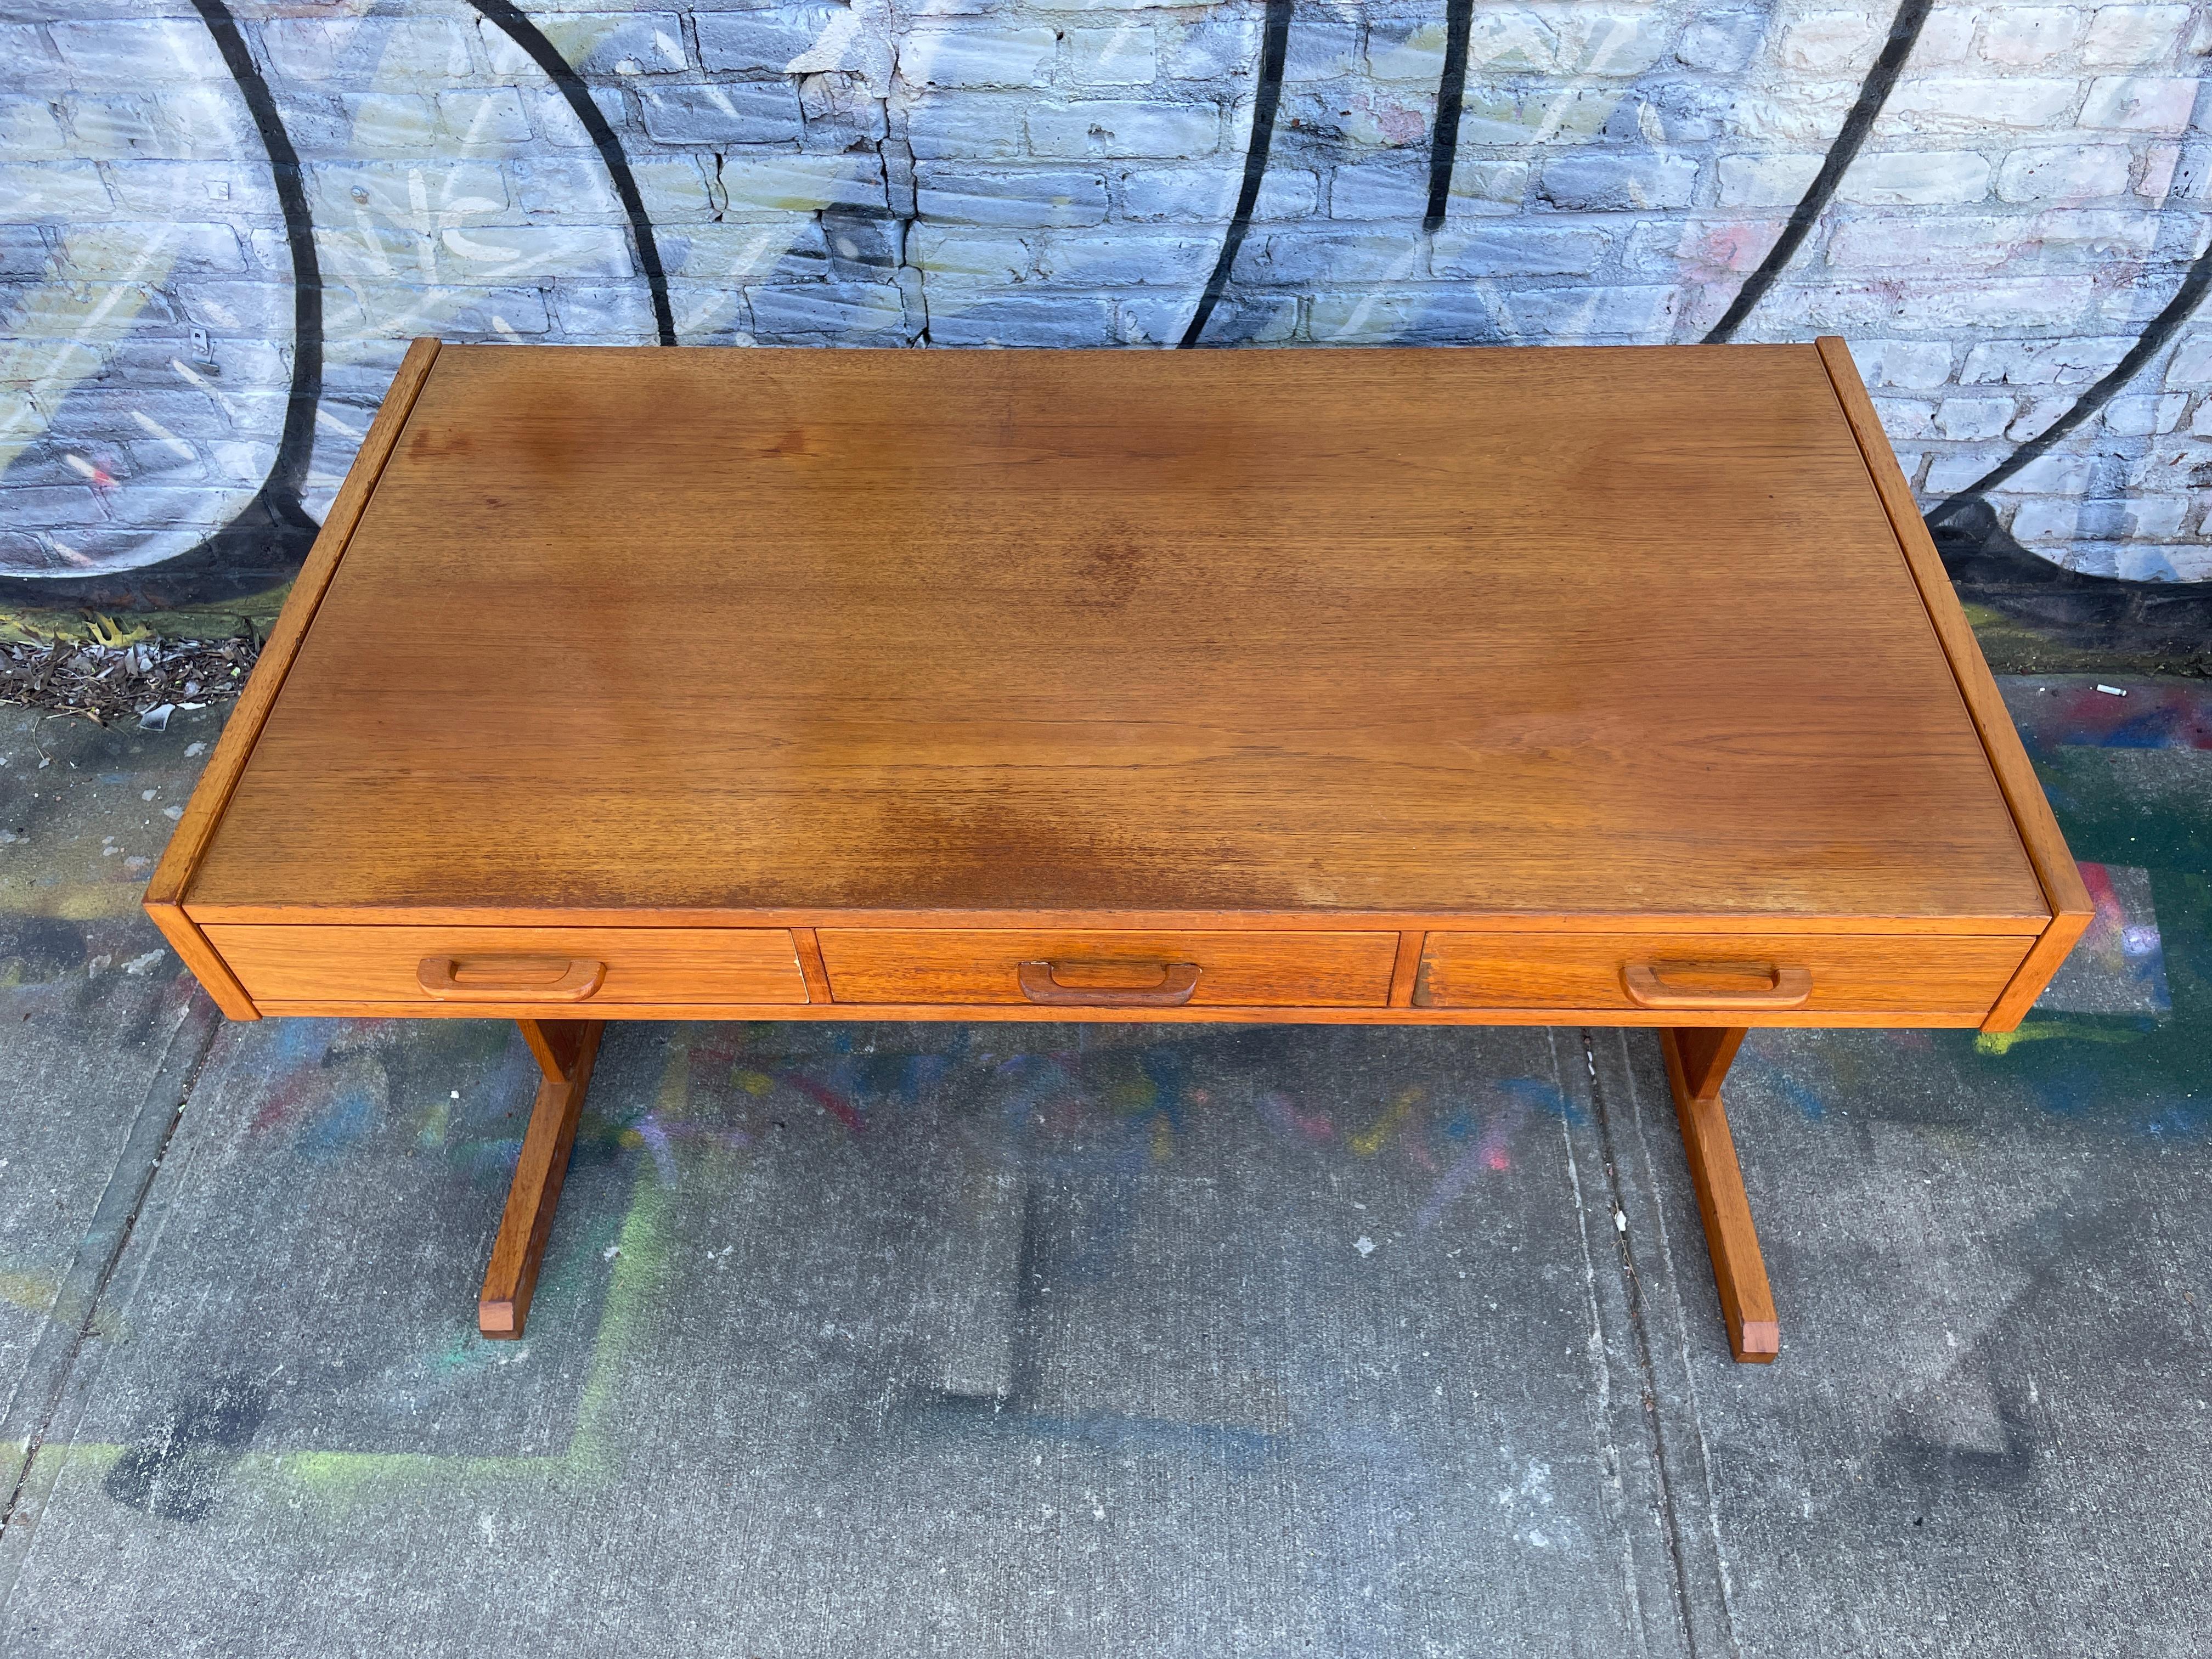 Danish modern teak desk with three drawers that have teak handles and a rectangular base. The drawers easily slide and are clean. original vintage condition and ready for use. Shows signs of use and patina. Desk top slides forward to reveal a hidden